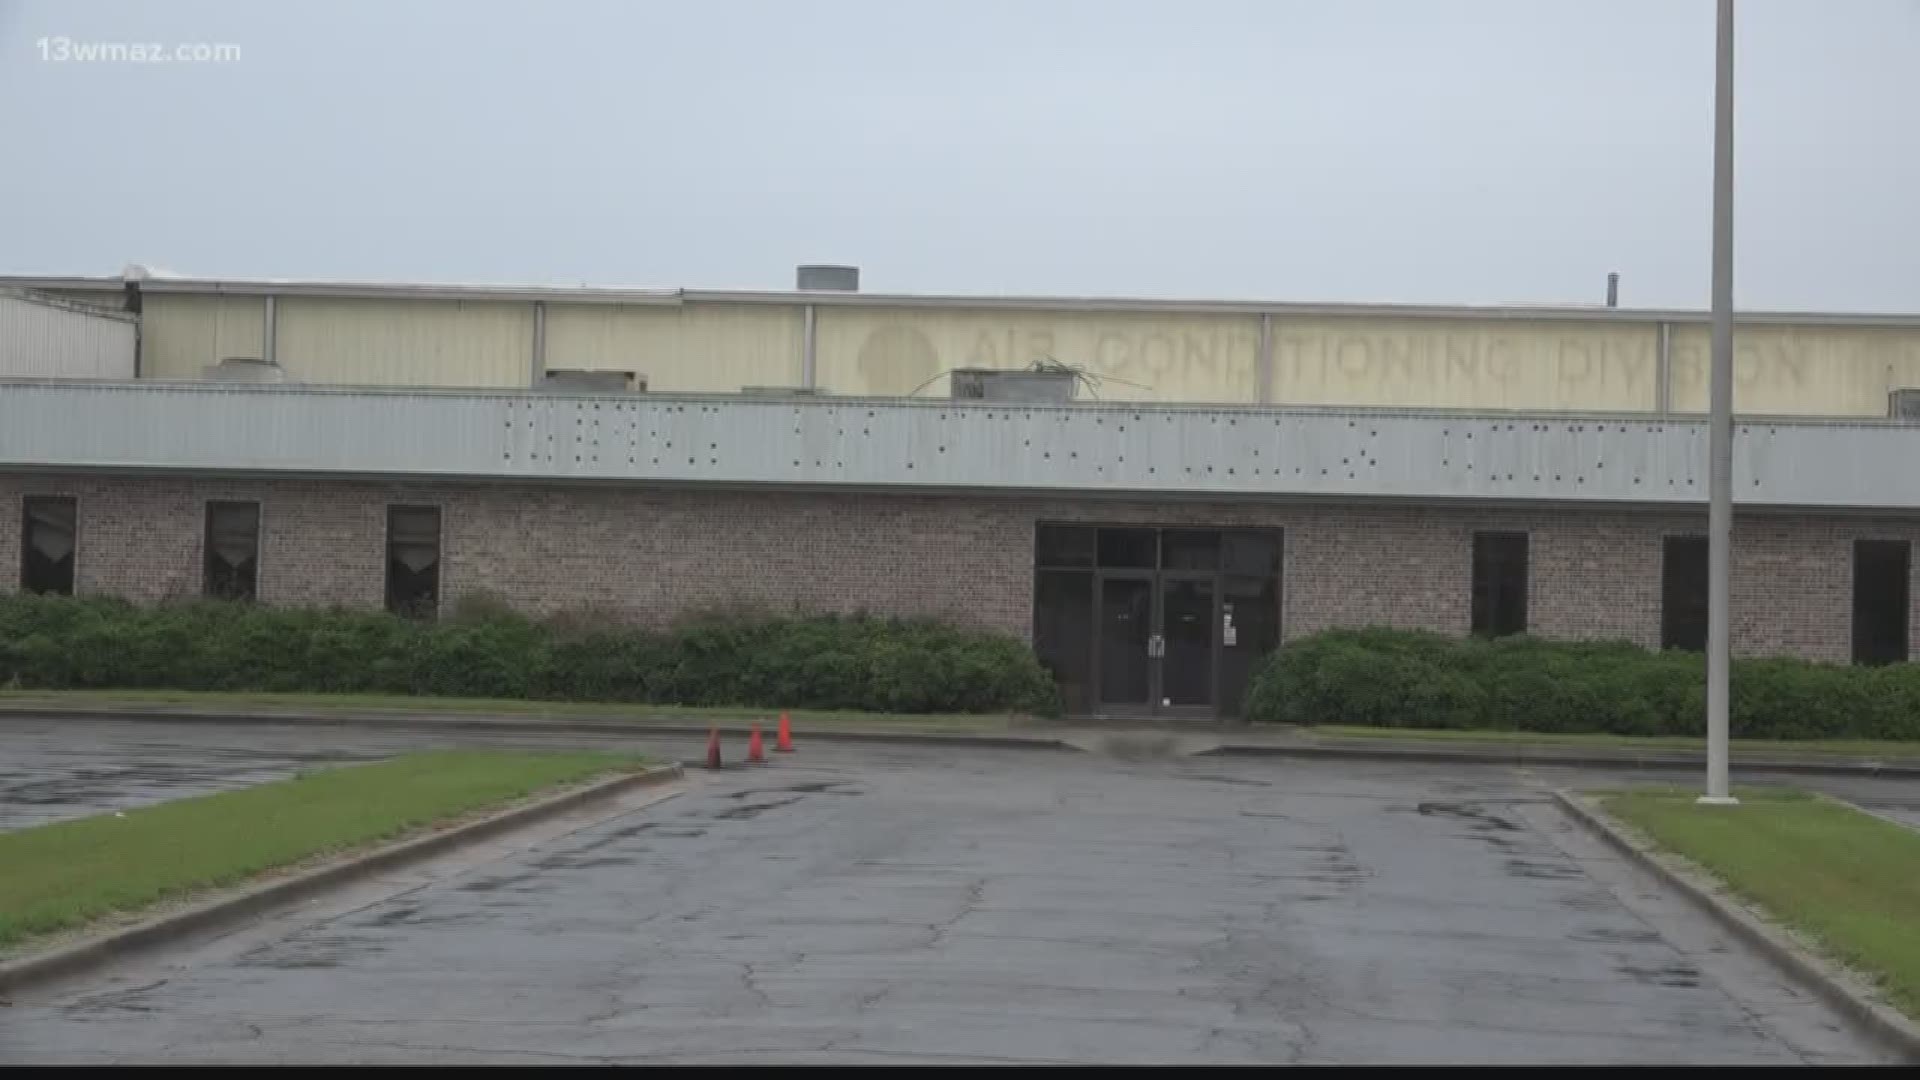 A Georgia trucking company plans to move its headquarters from Smyrna to Milledgeville and create hundreds of new jobs.